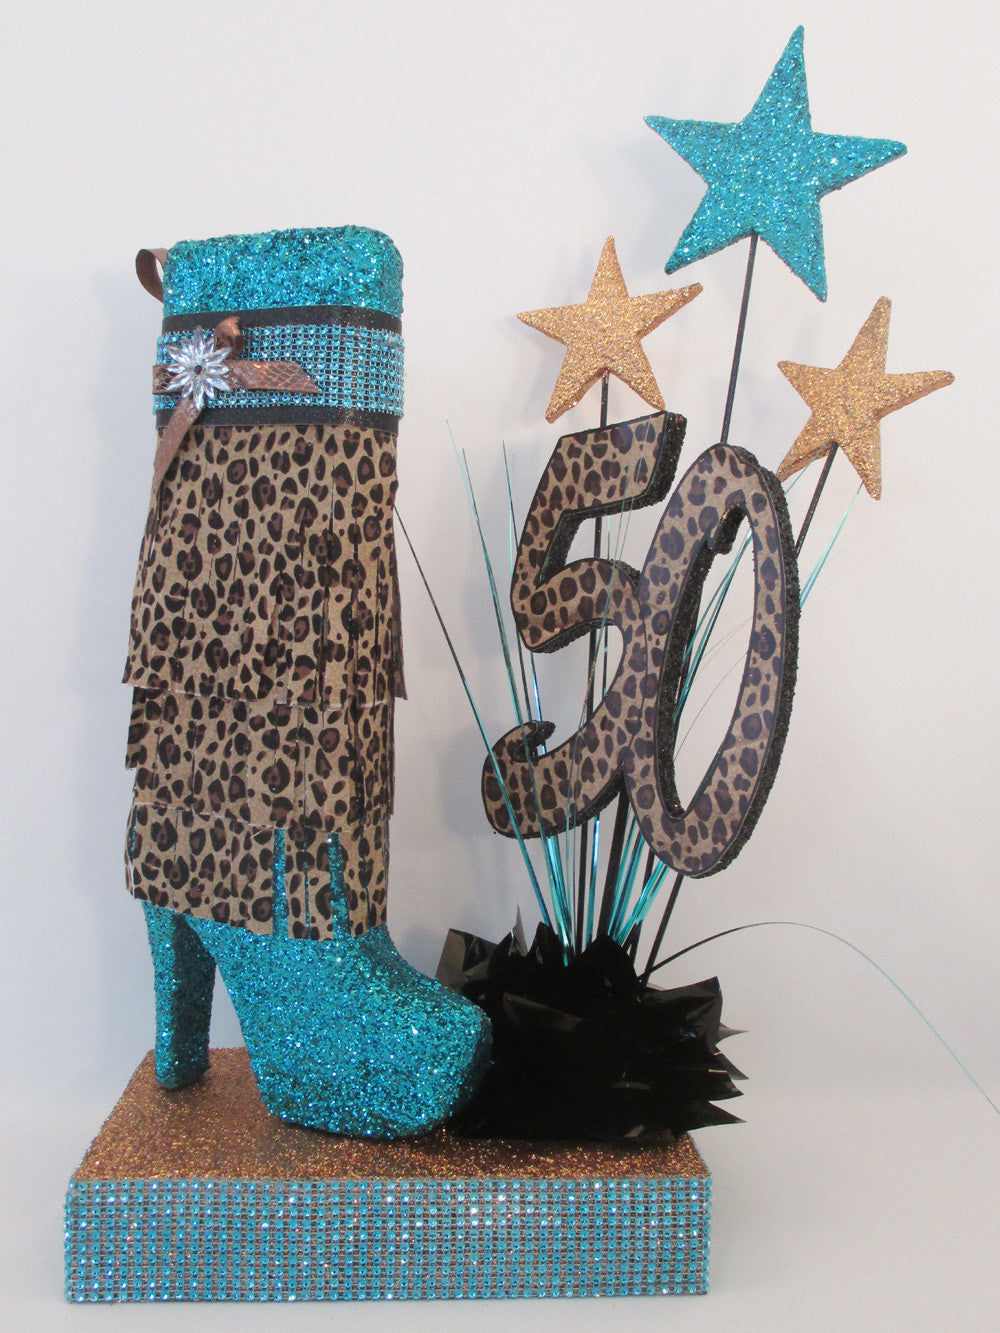 High heel boot with leopard fringe birthday centerpiece - Designs by Ginny